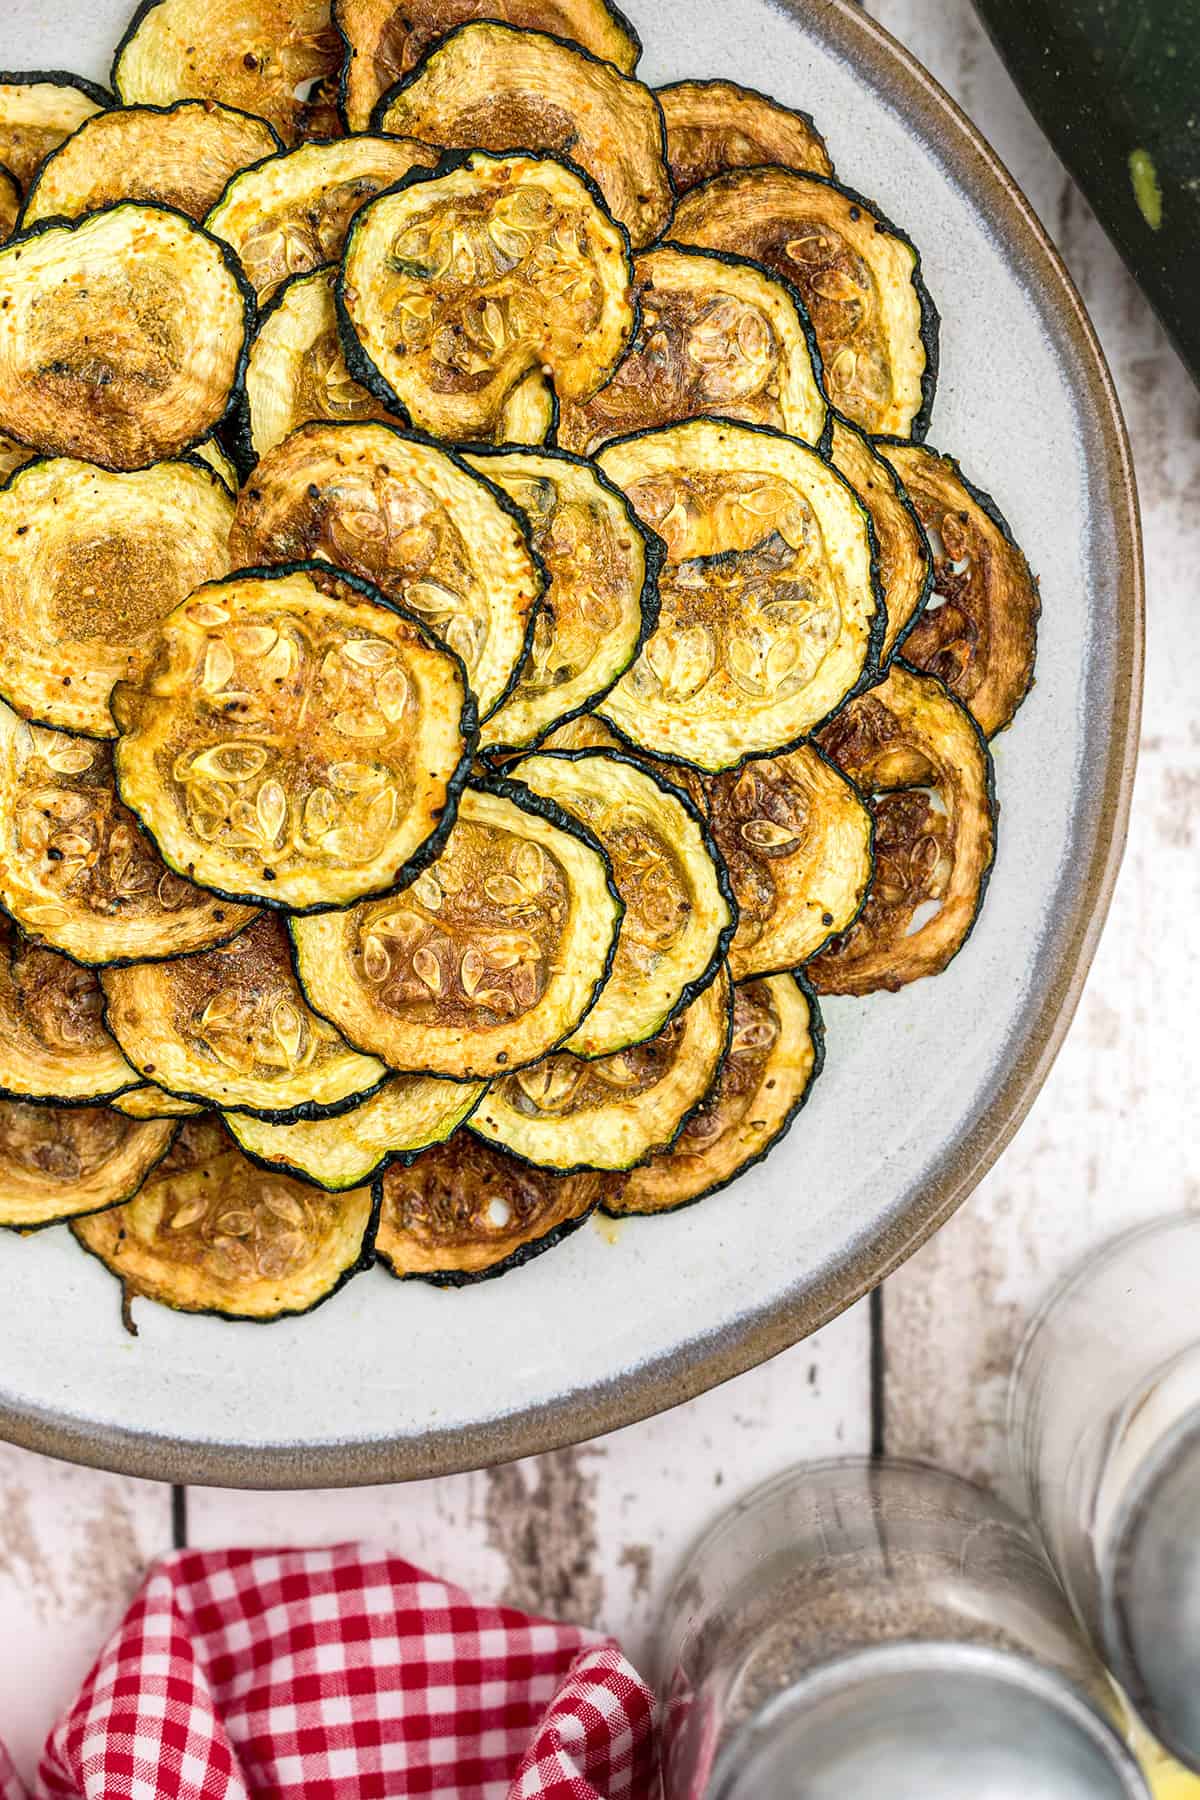 Finished zucchini chips on a white plate.